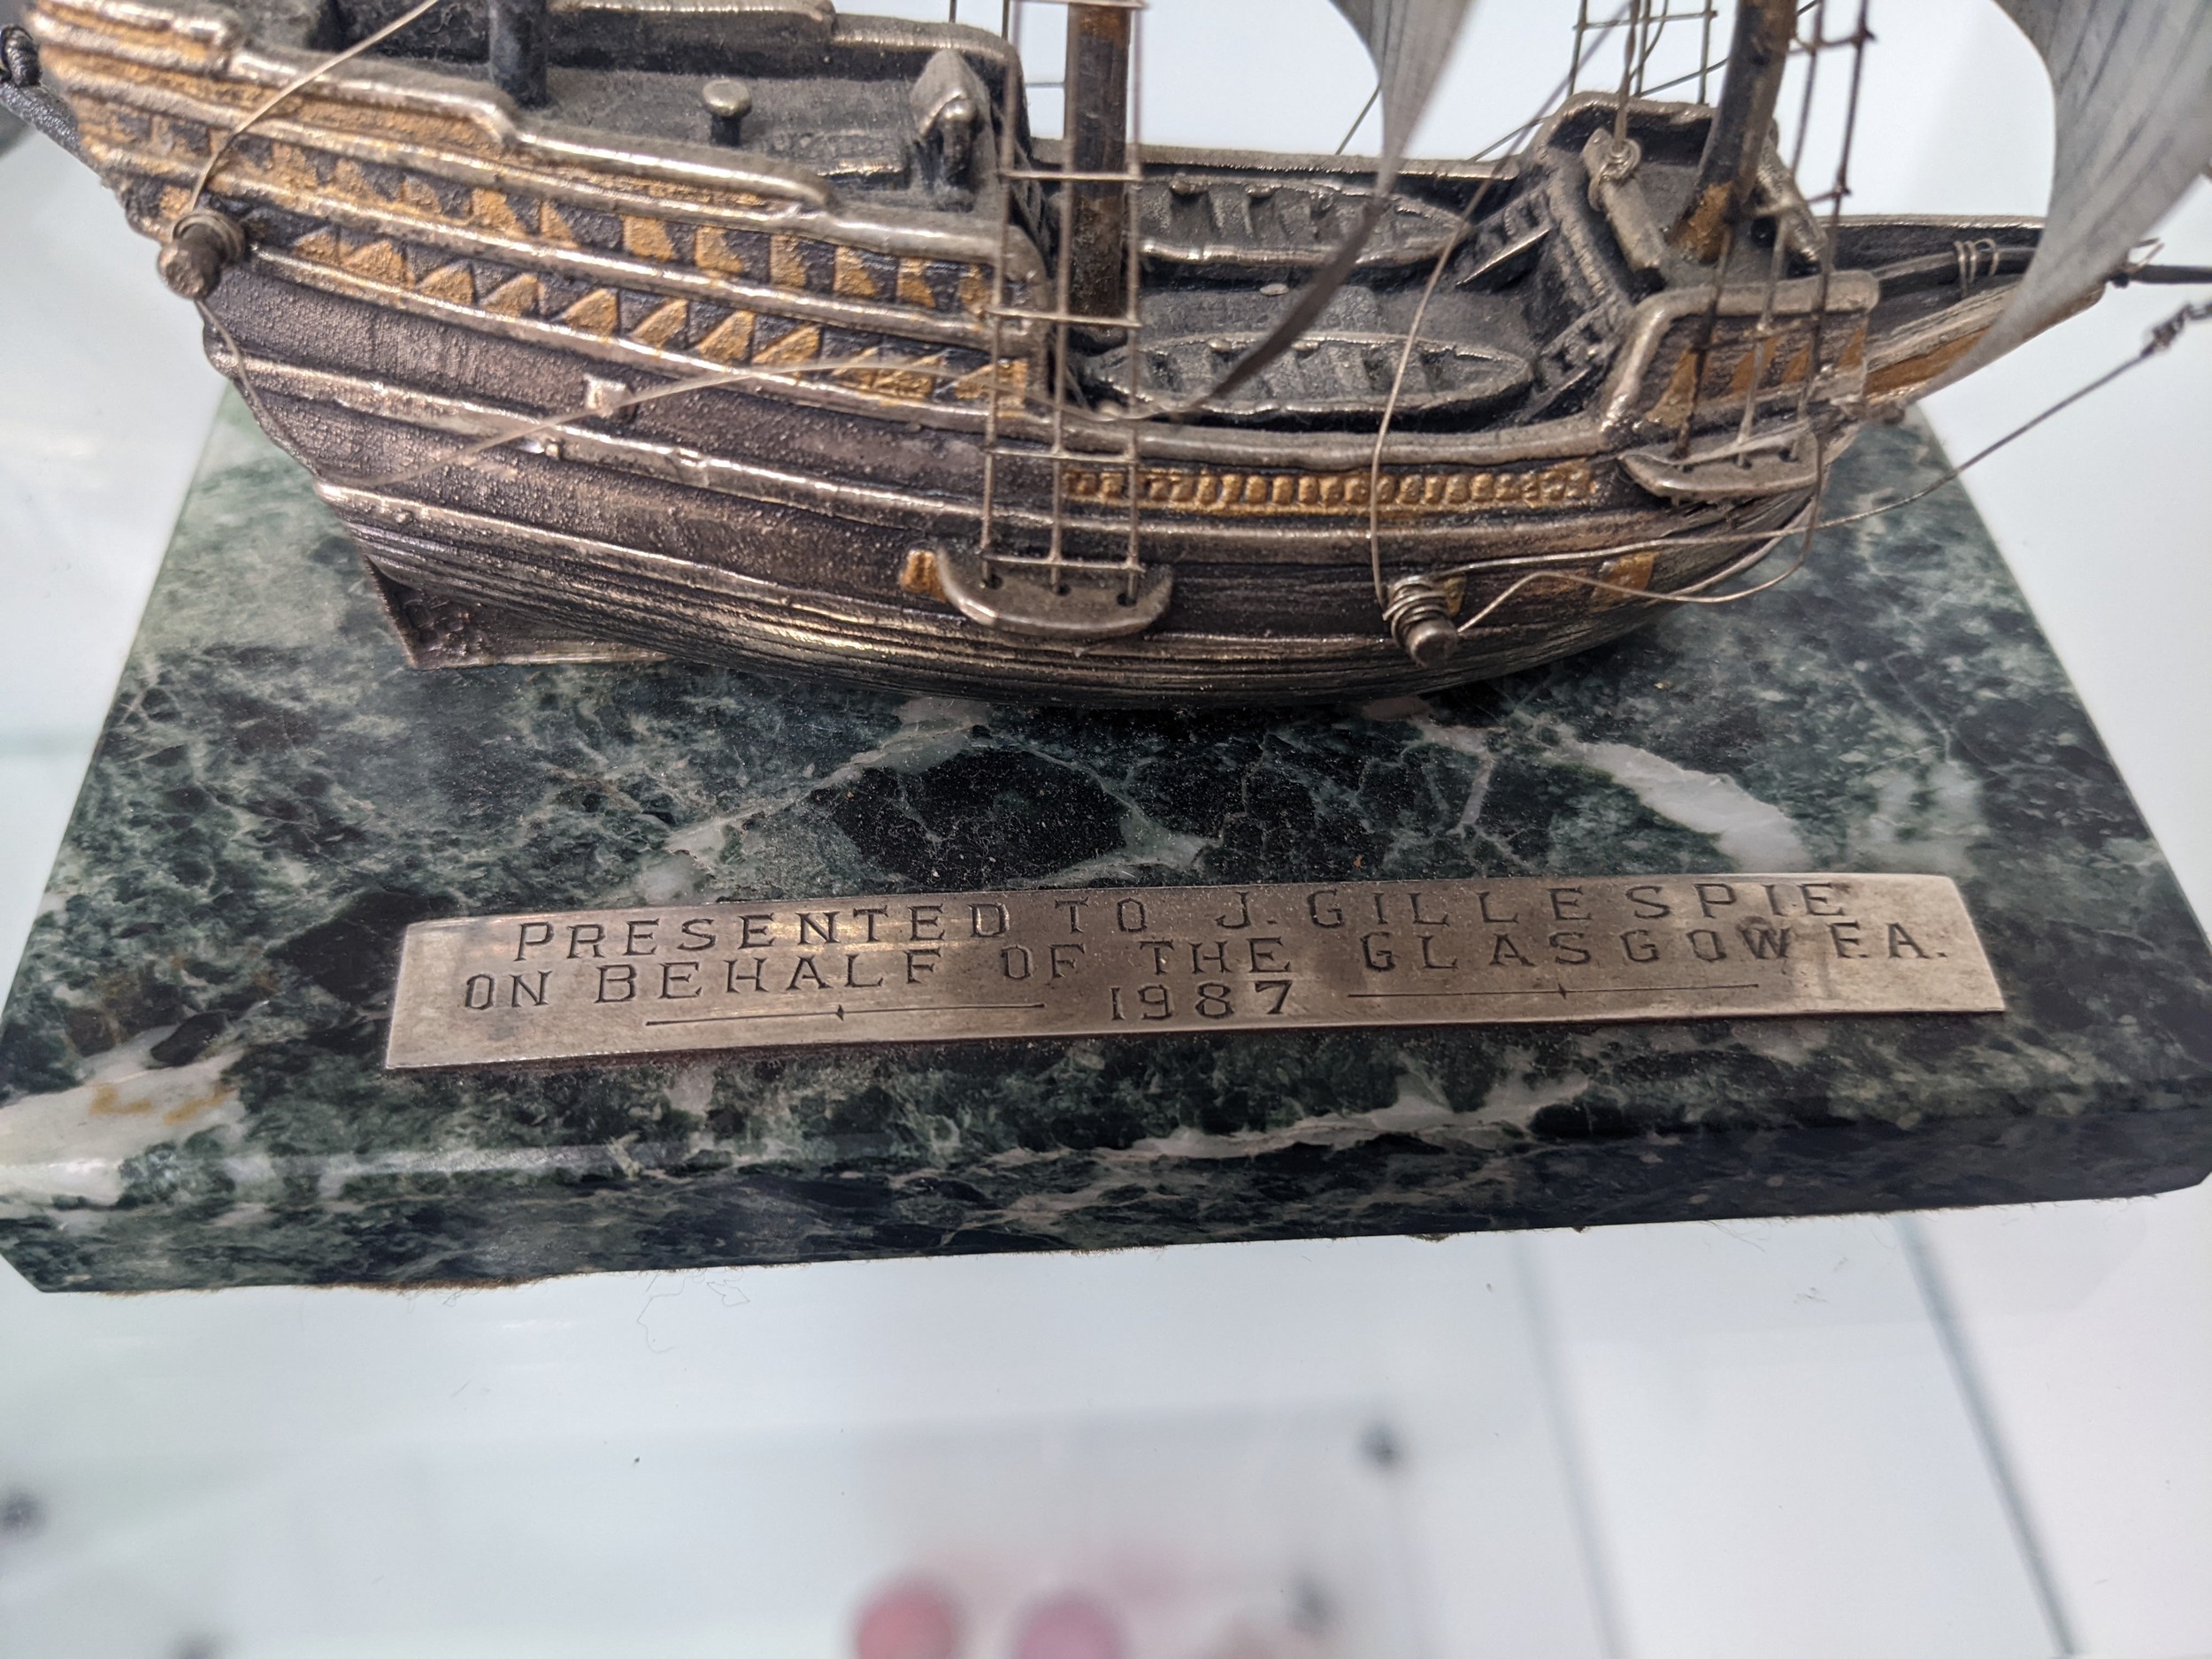 Birmingham silver Chinese ship model 'The Mayflower 1620' [62/850] 'Presented to J. Gillespie On - Image 6 of 8